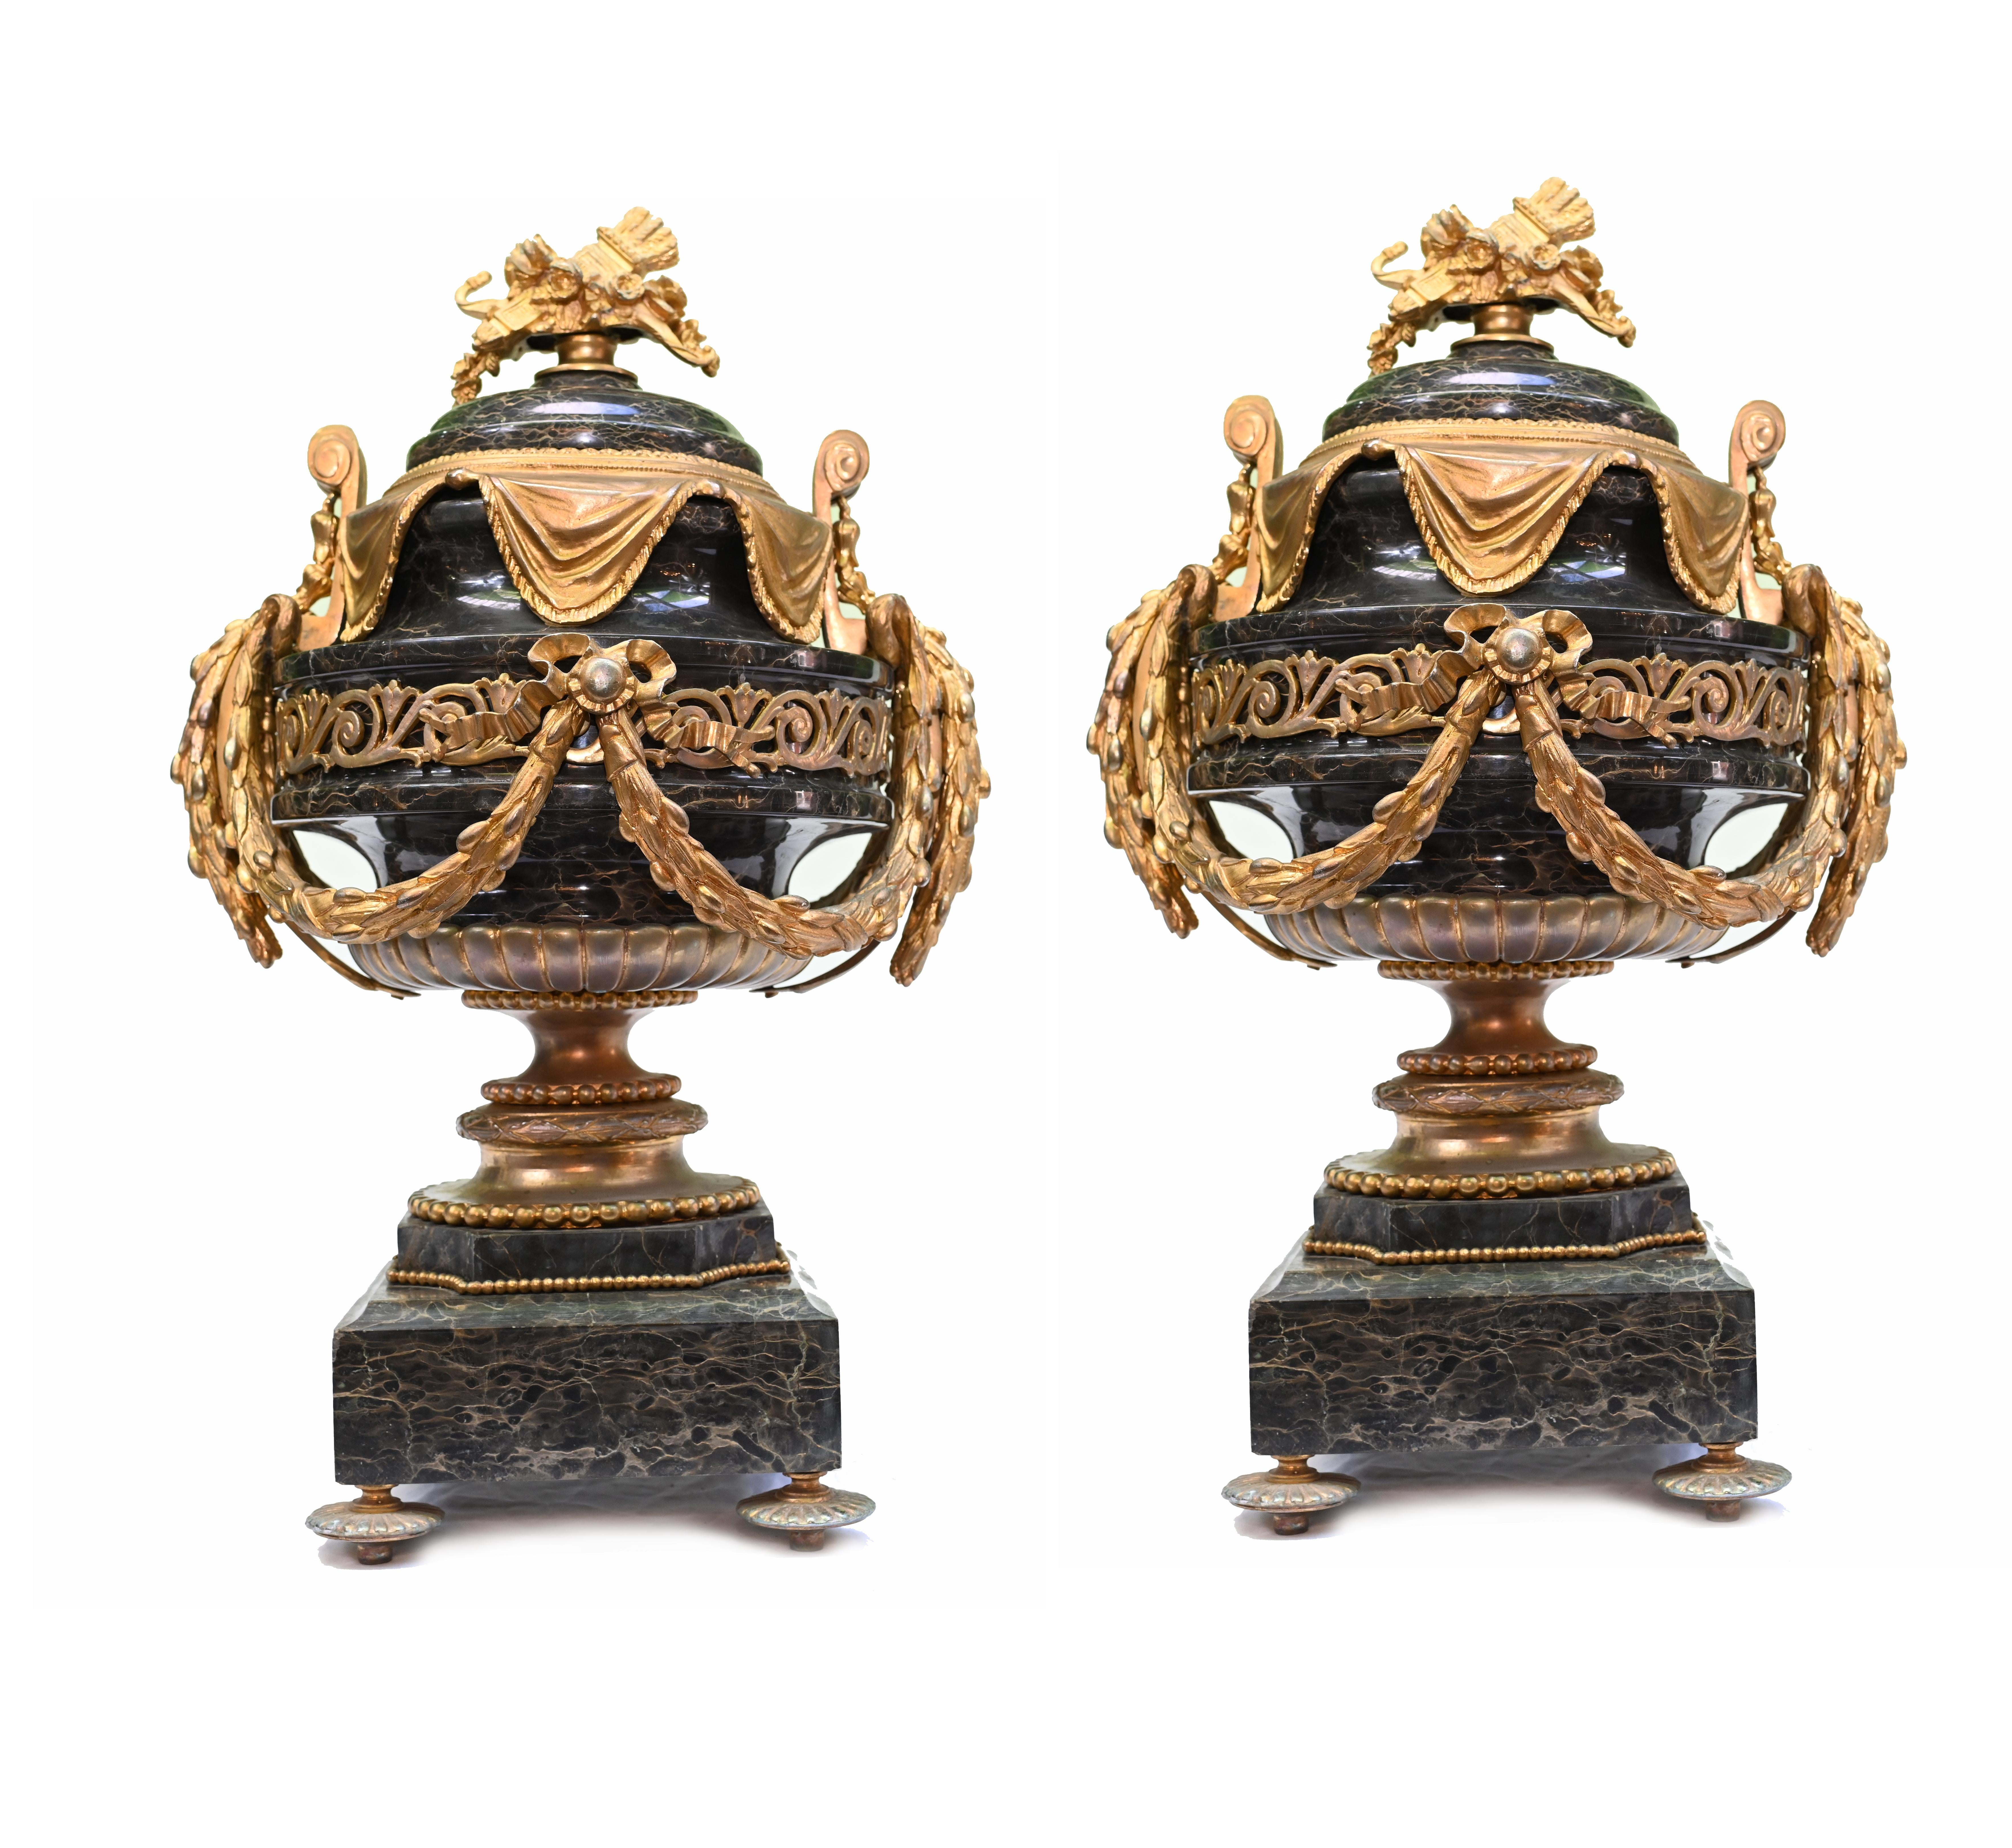 Mouth watering pair of French Empire marble cassolettes
The stone is black Portoro marble with such a beautiful grain and all smooth and chip free
The ormolu mounts are very well cast including sashes, drape motis and wheat sheaf finial
Circa 1880